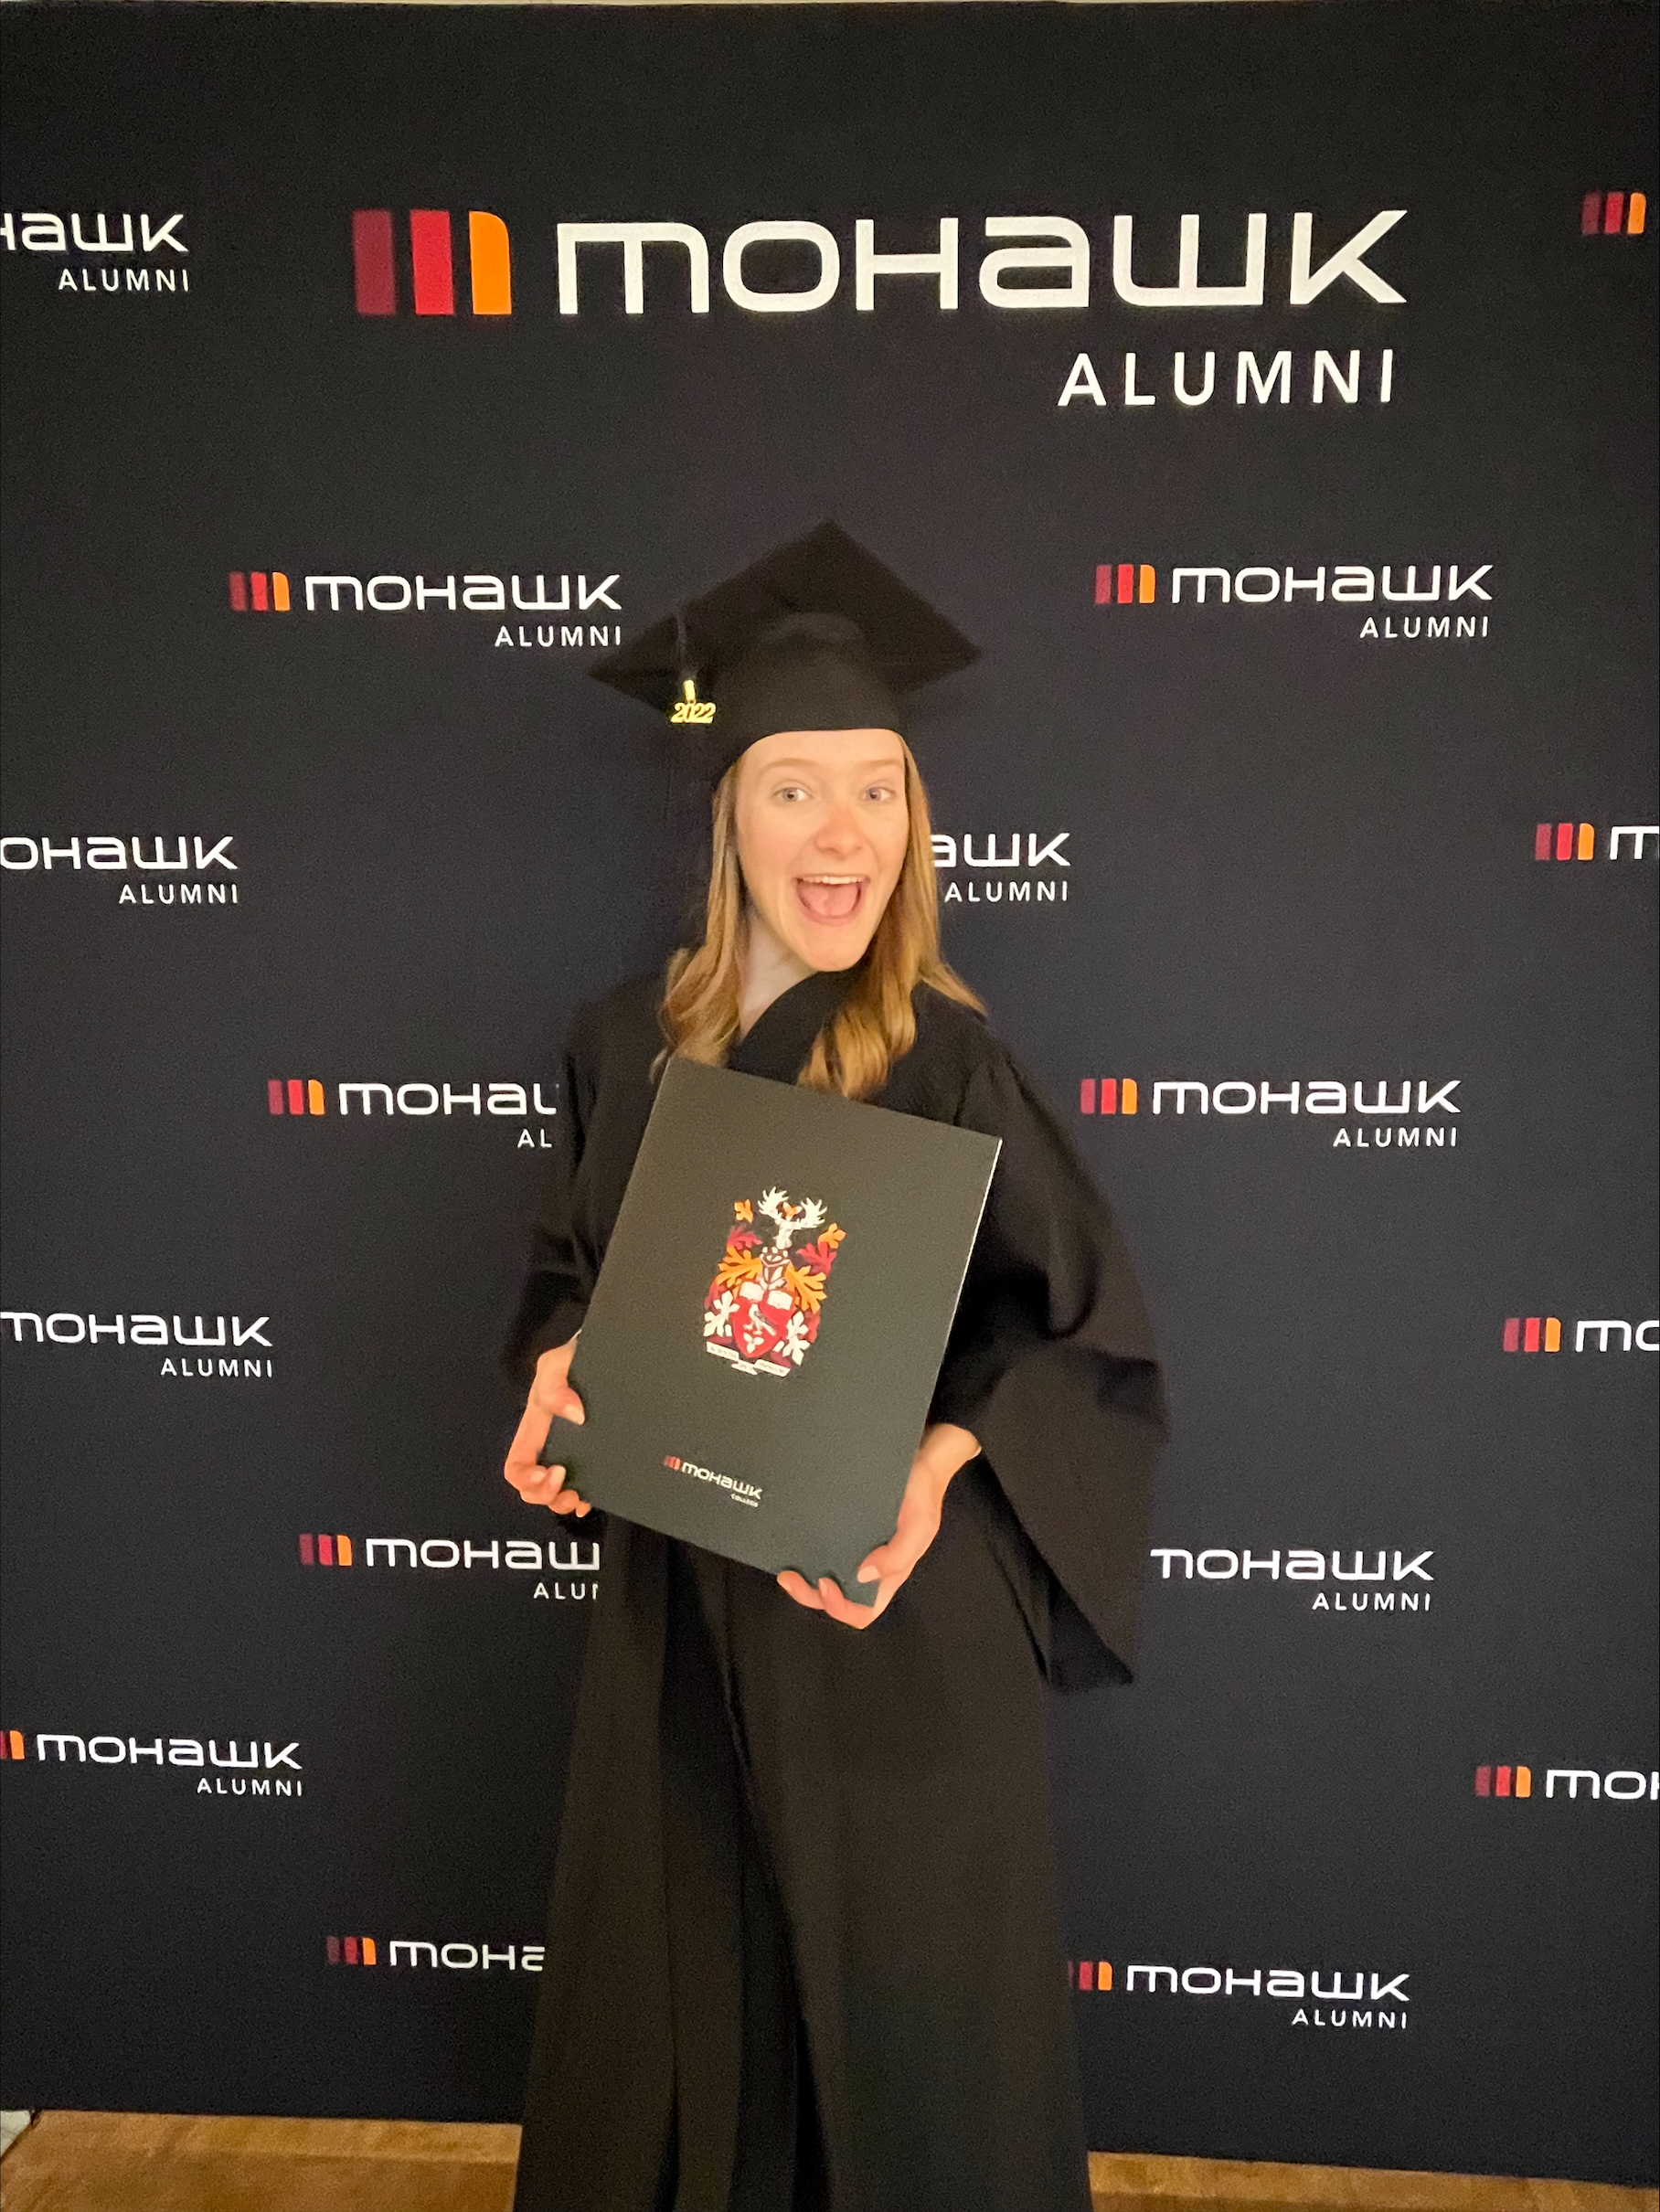 Graduation Day! Emilee, in her cap and gown, smiles and proudly displays her diploma. She is standing in front of a Mohawk College Alumni branded backdrop.